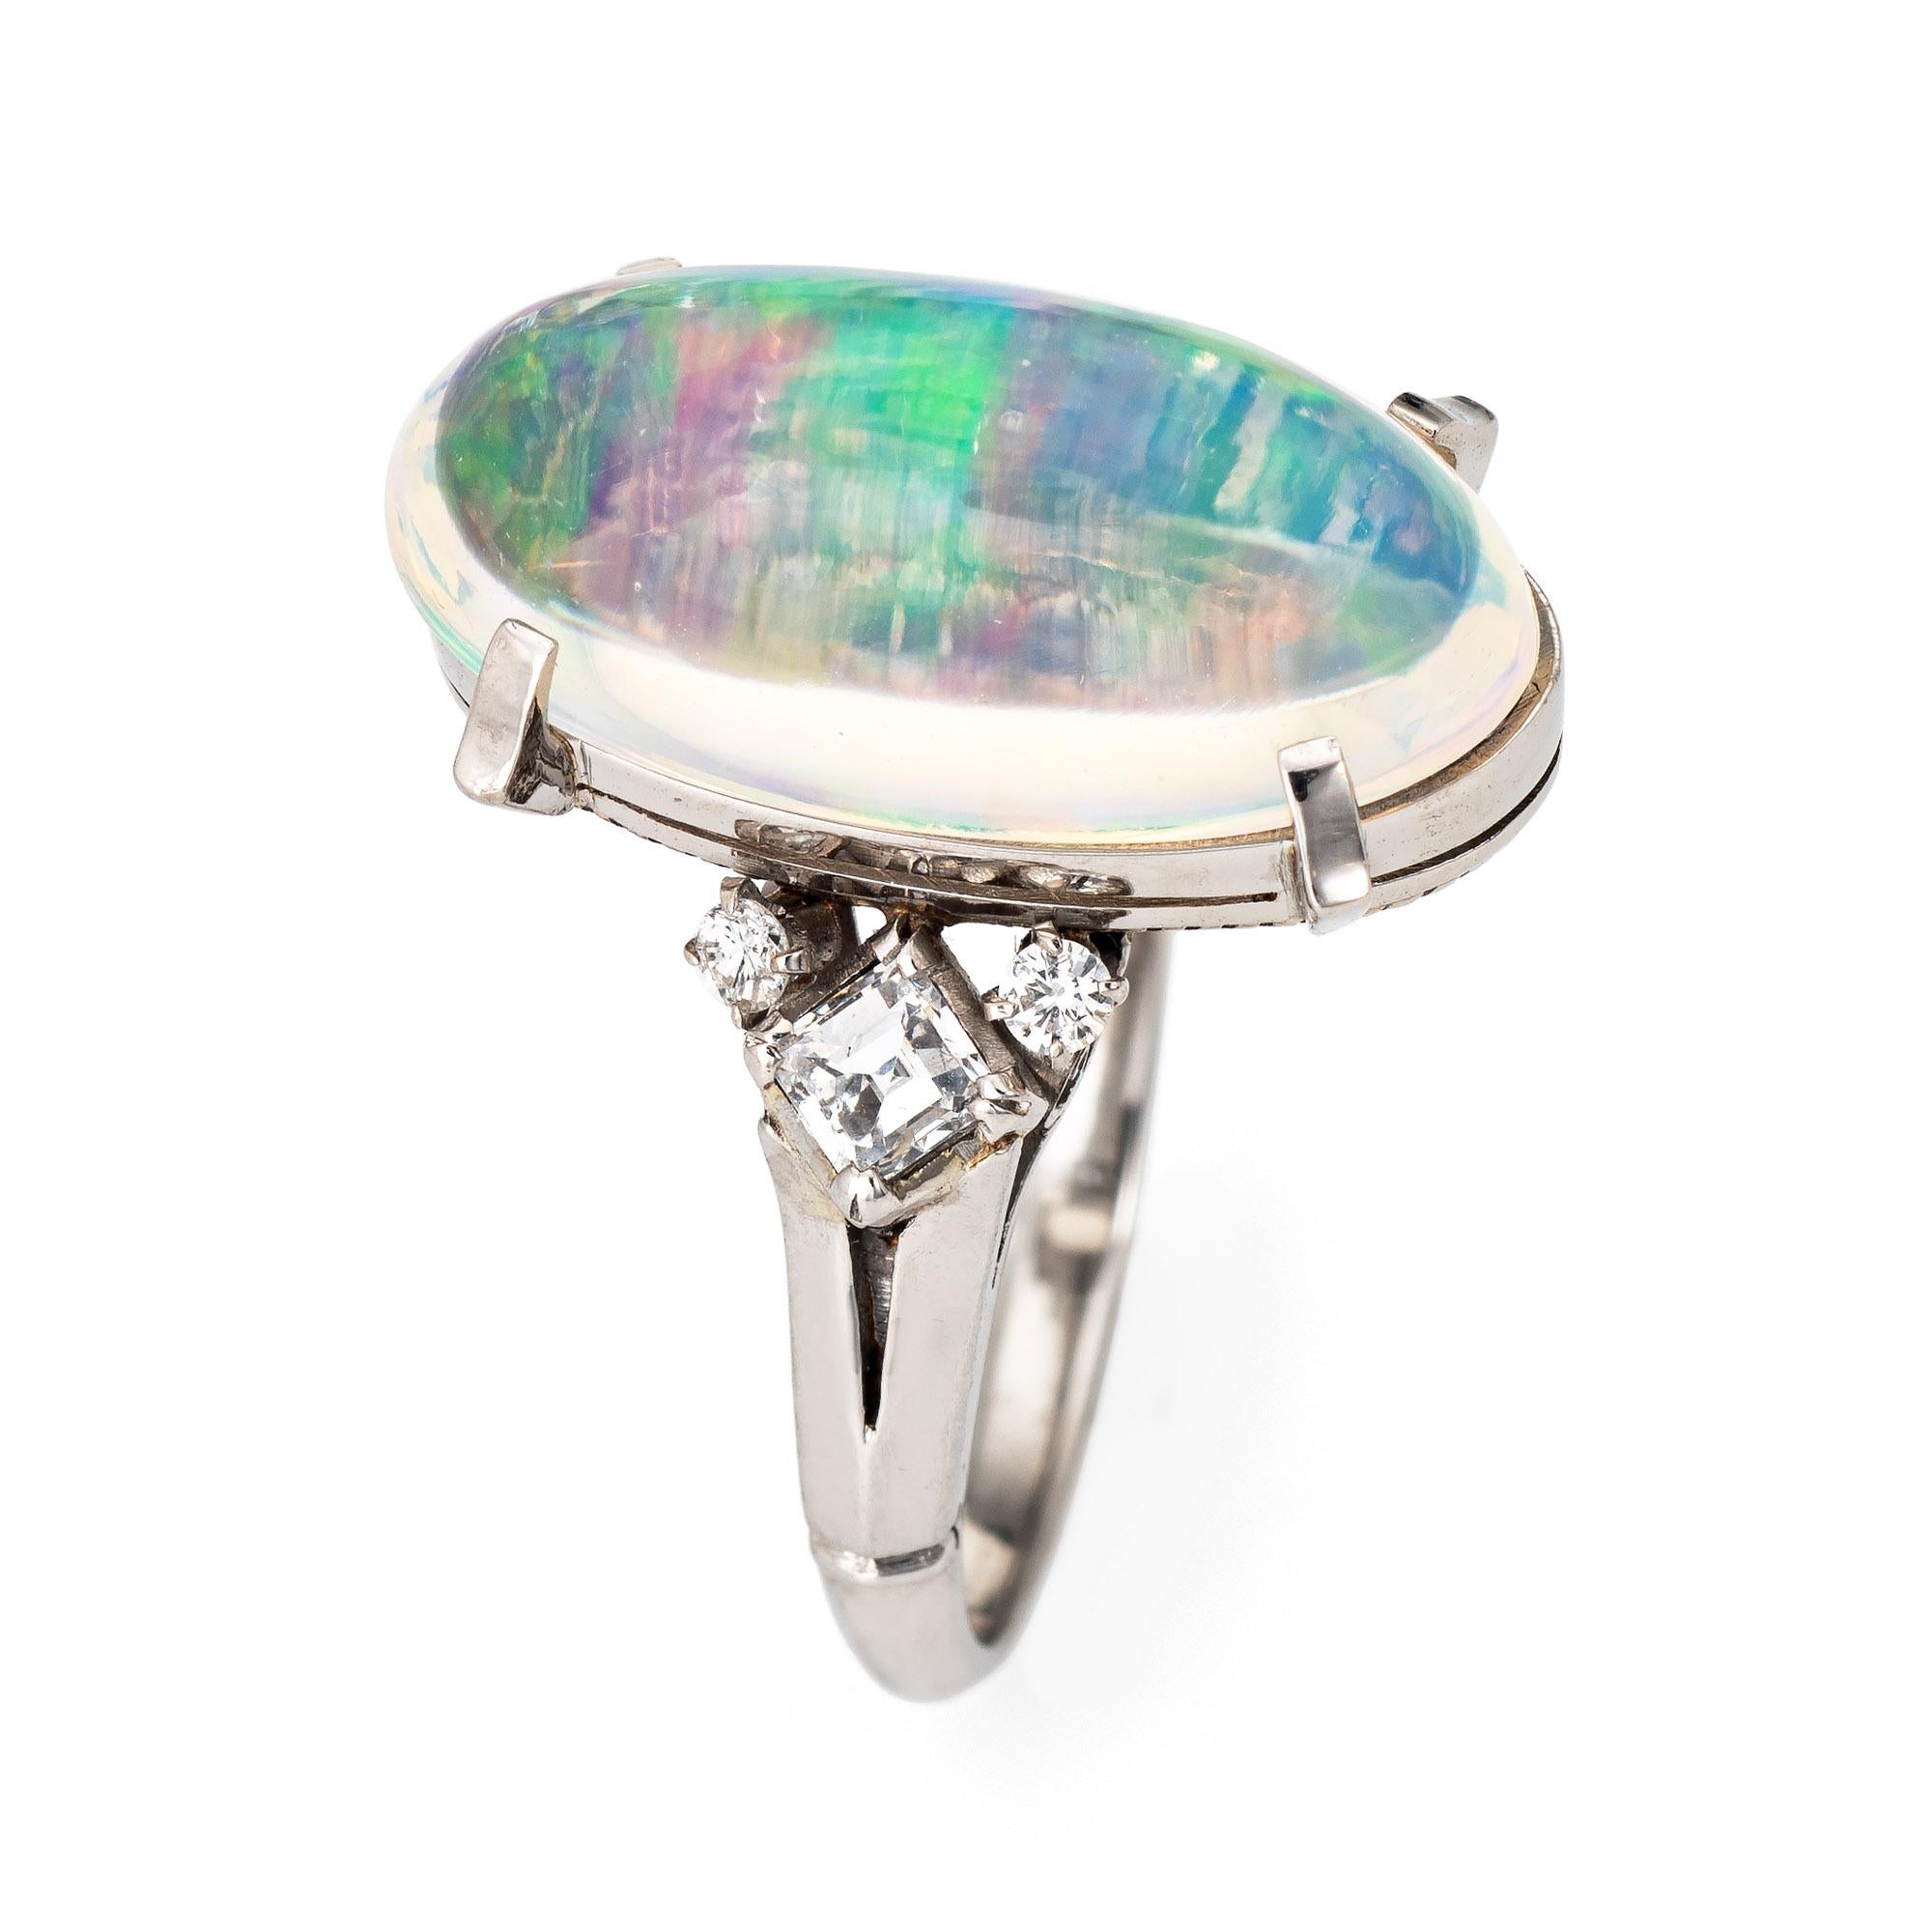 Stylish natural jelly opal & diamond ring crafted in 850 platinum. 

Natural jelly opal measures 18mm x 9mm (estimated at 6.50 carats) accented with an estimated 0.28 carats of diamonds (estimated at G-H color and VS2-SI1 clarity). The opal is in